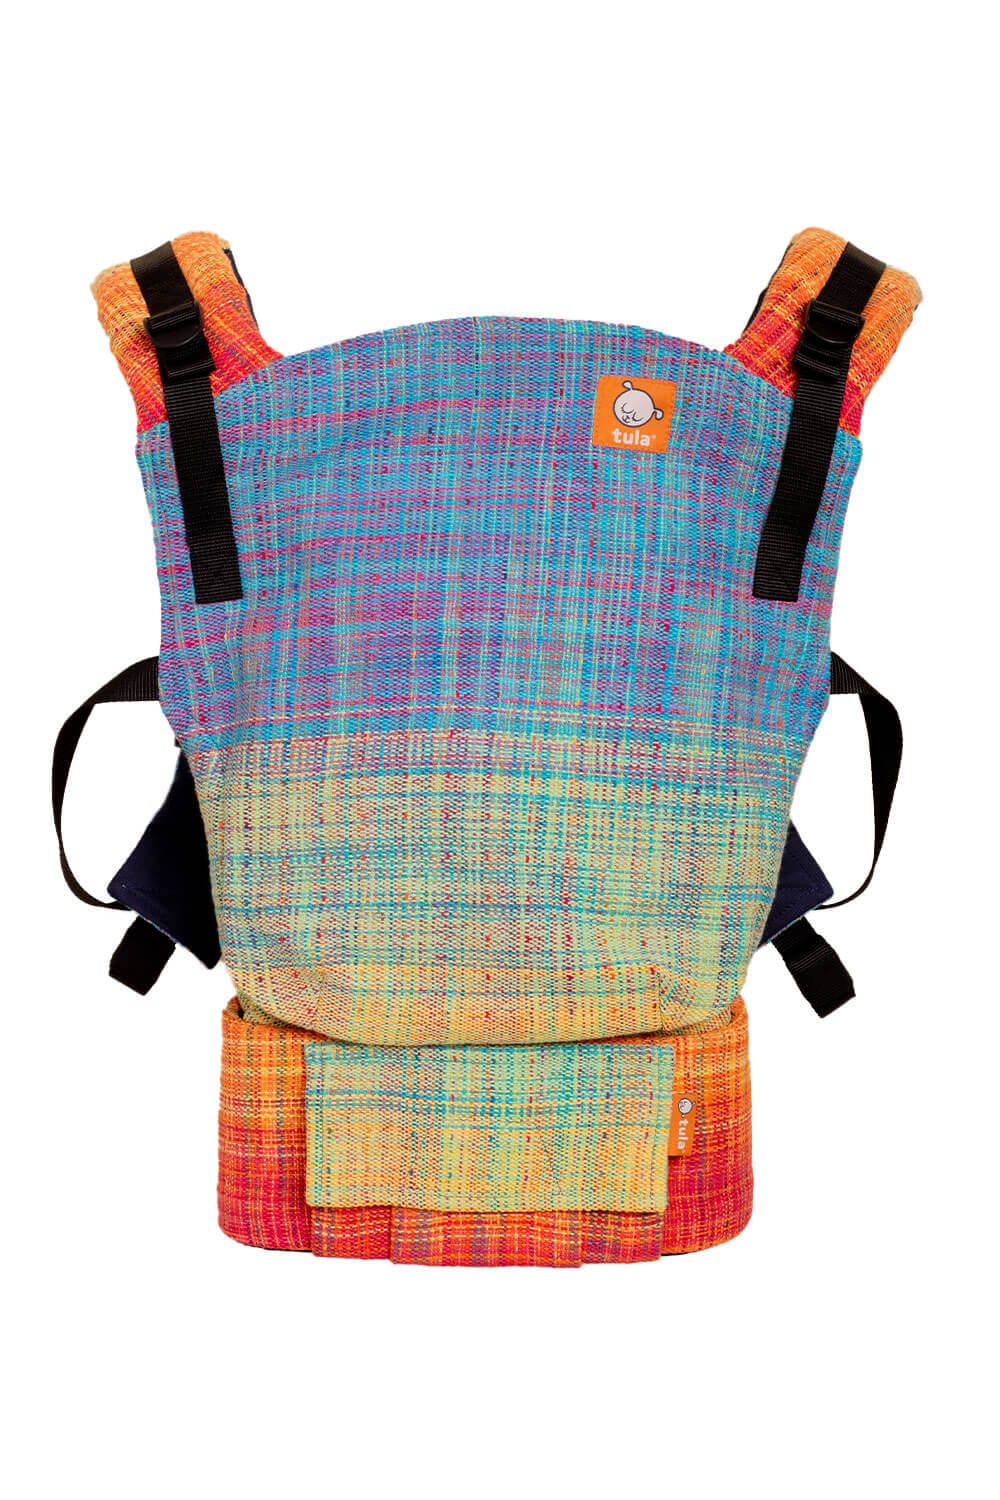 Rainbow Bright - Signature Handwoven Free-to-Grow Baby Carrier